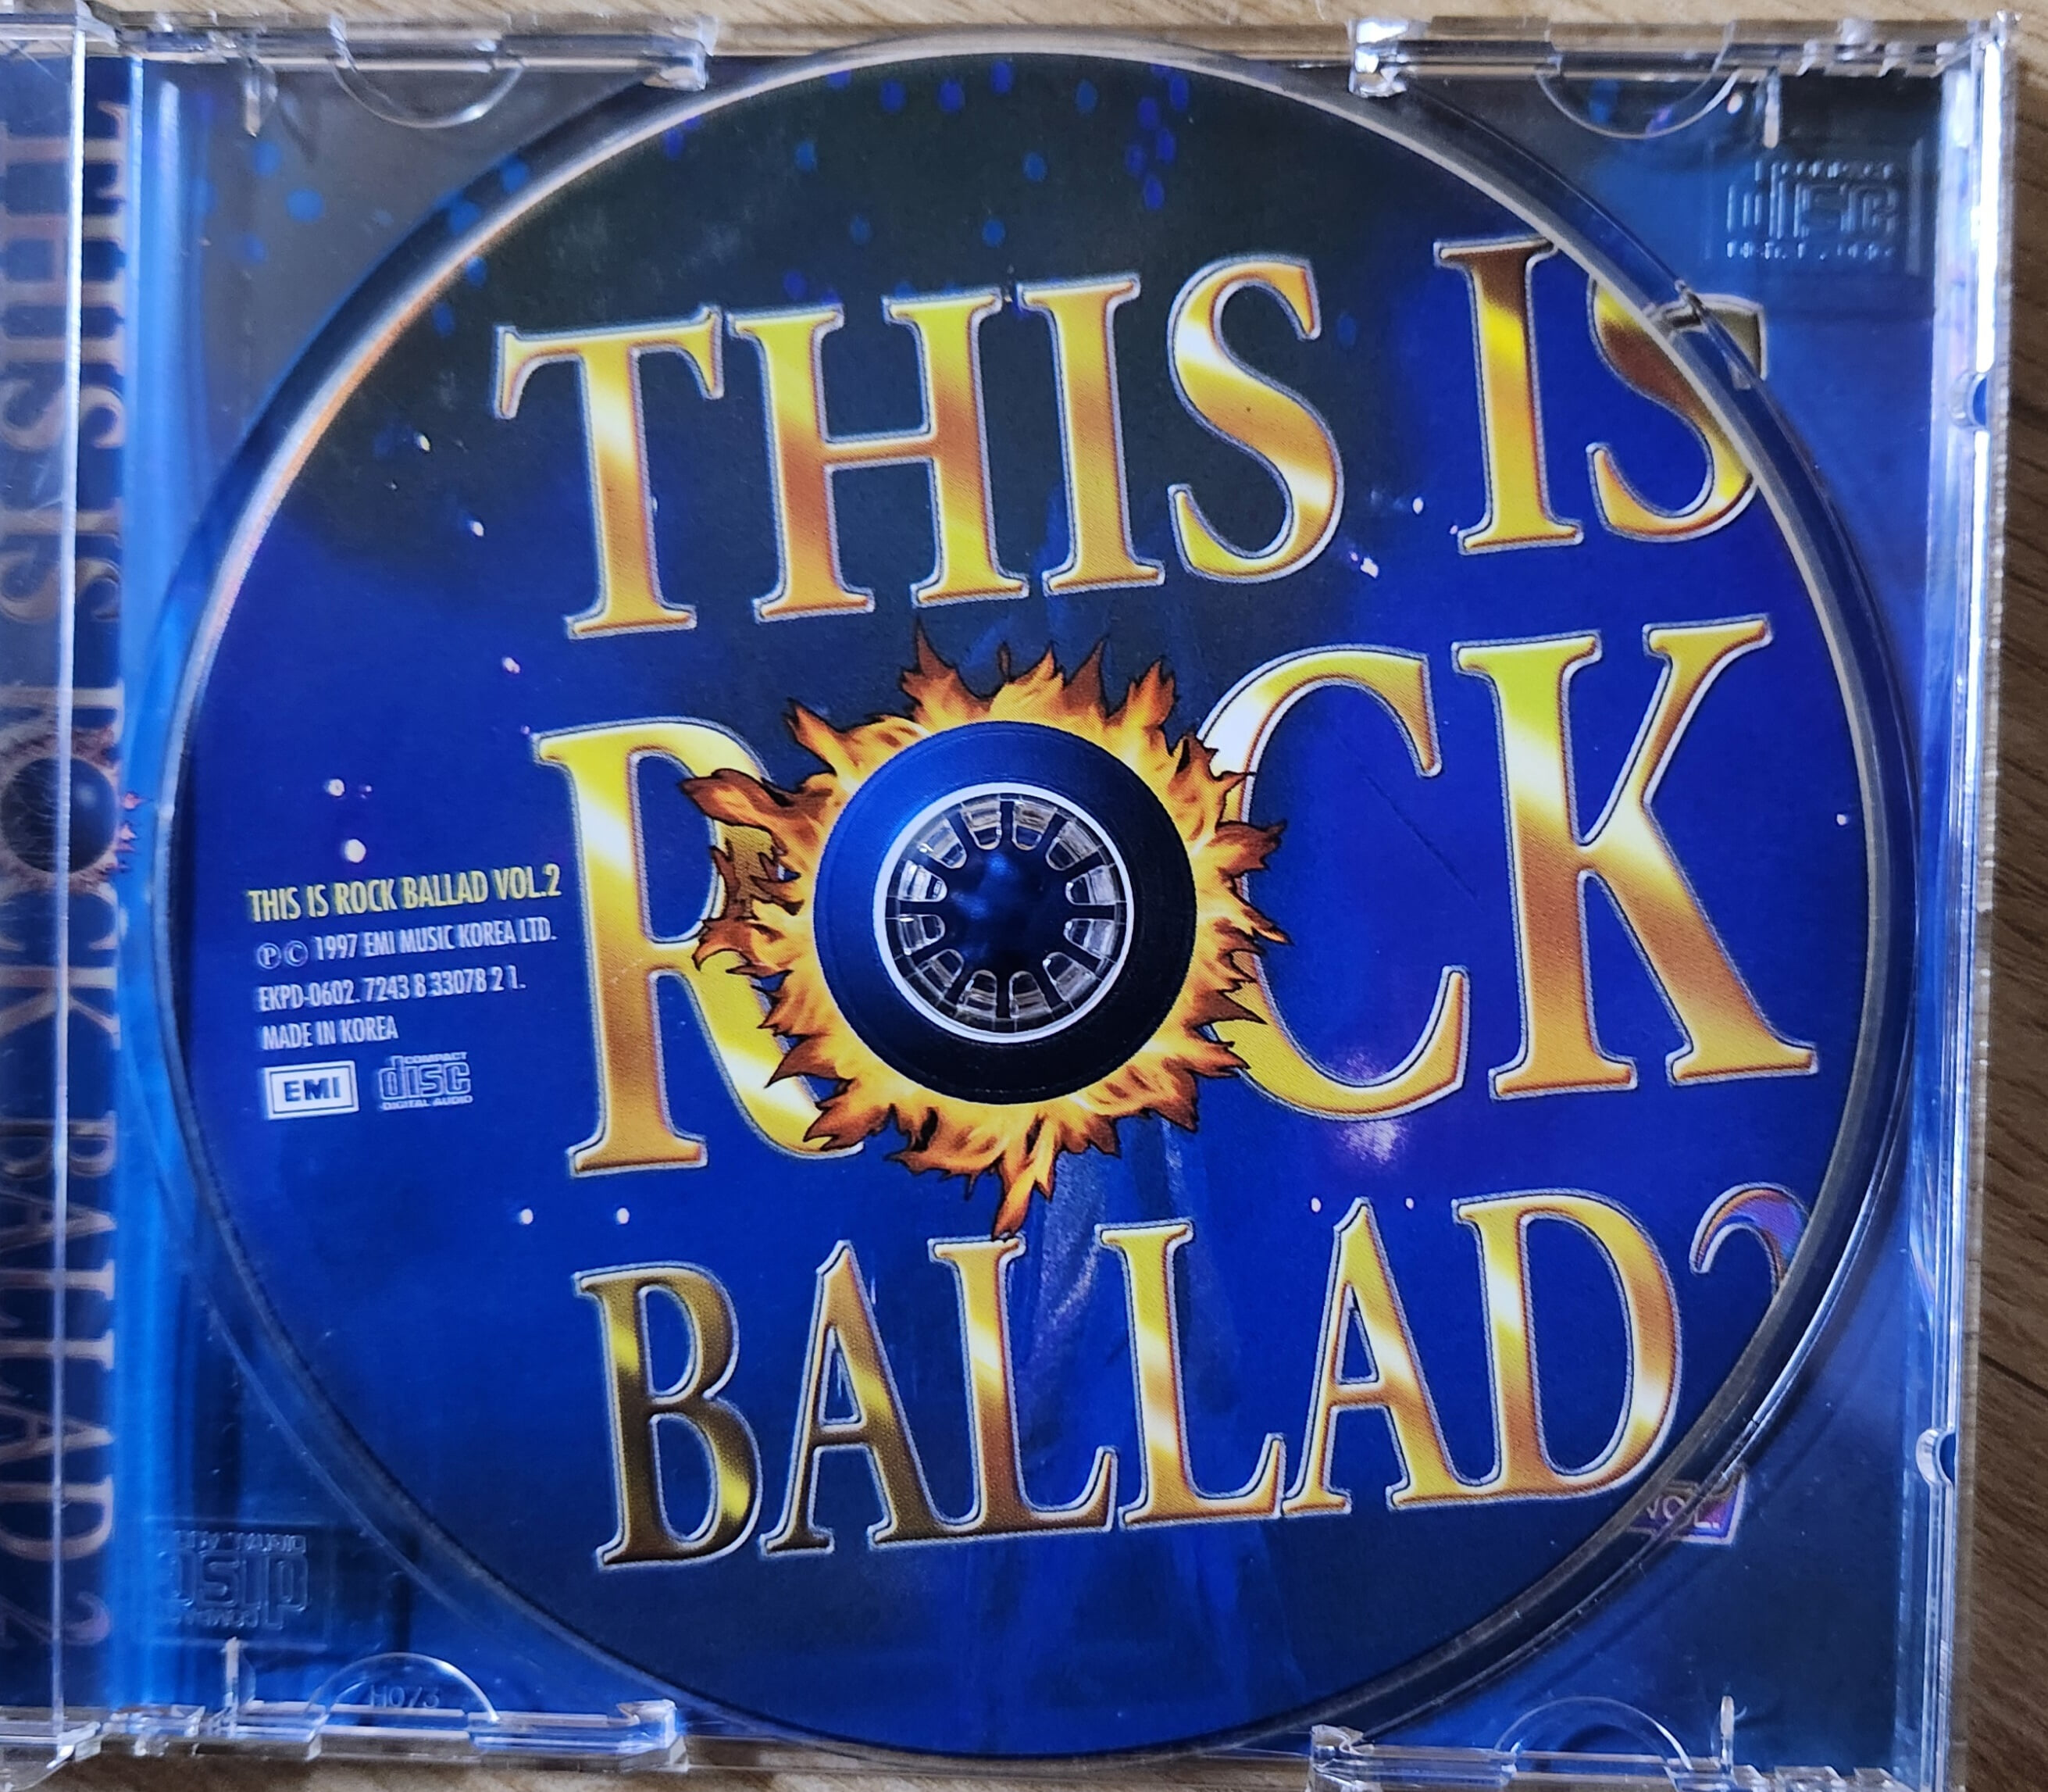 THIS IS ROCK BALLAD 2